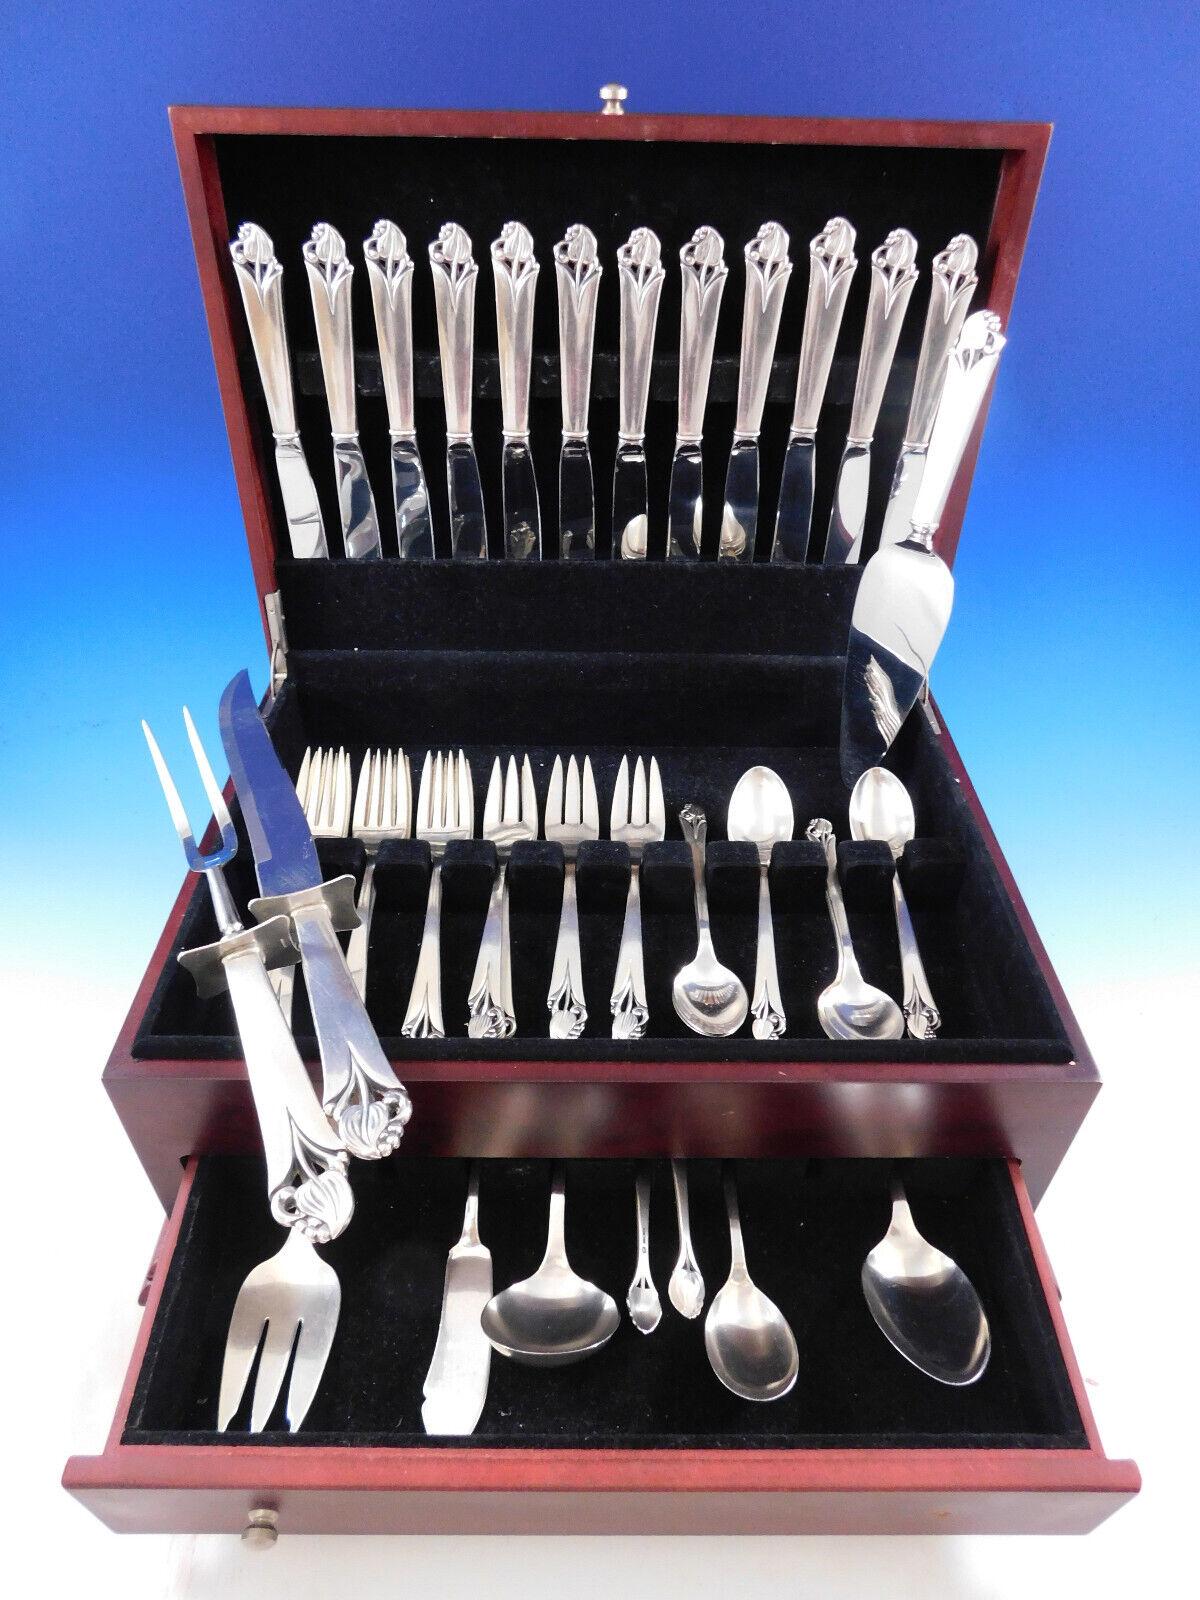 Woodlily (Glossy finish) by Frank Smith sterling silver flatware set, 57 pieces. This graceful pattern features a modern stylized leaf and openwork at the top of the handle around the stem, and bead detailing. This set includes:


12 Knives, 8